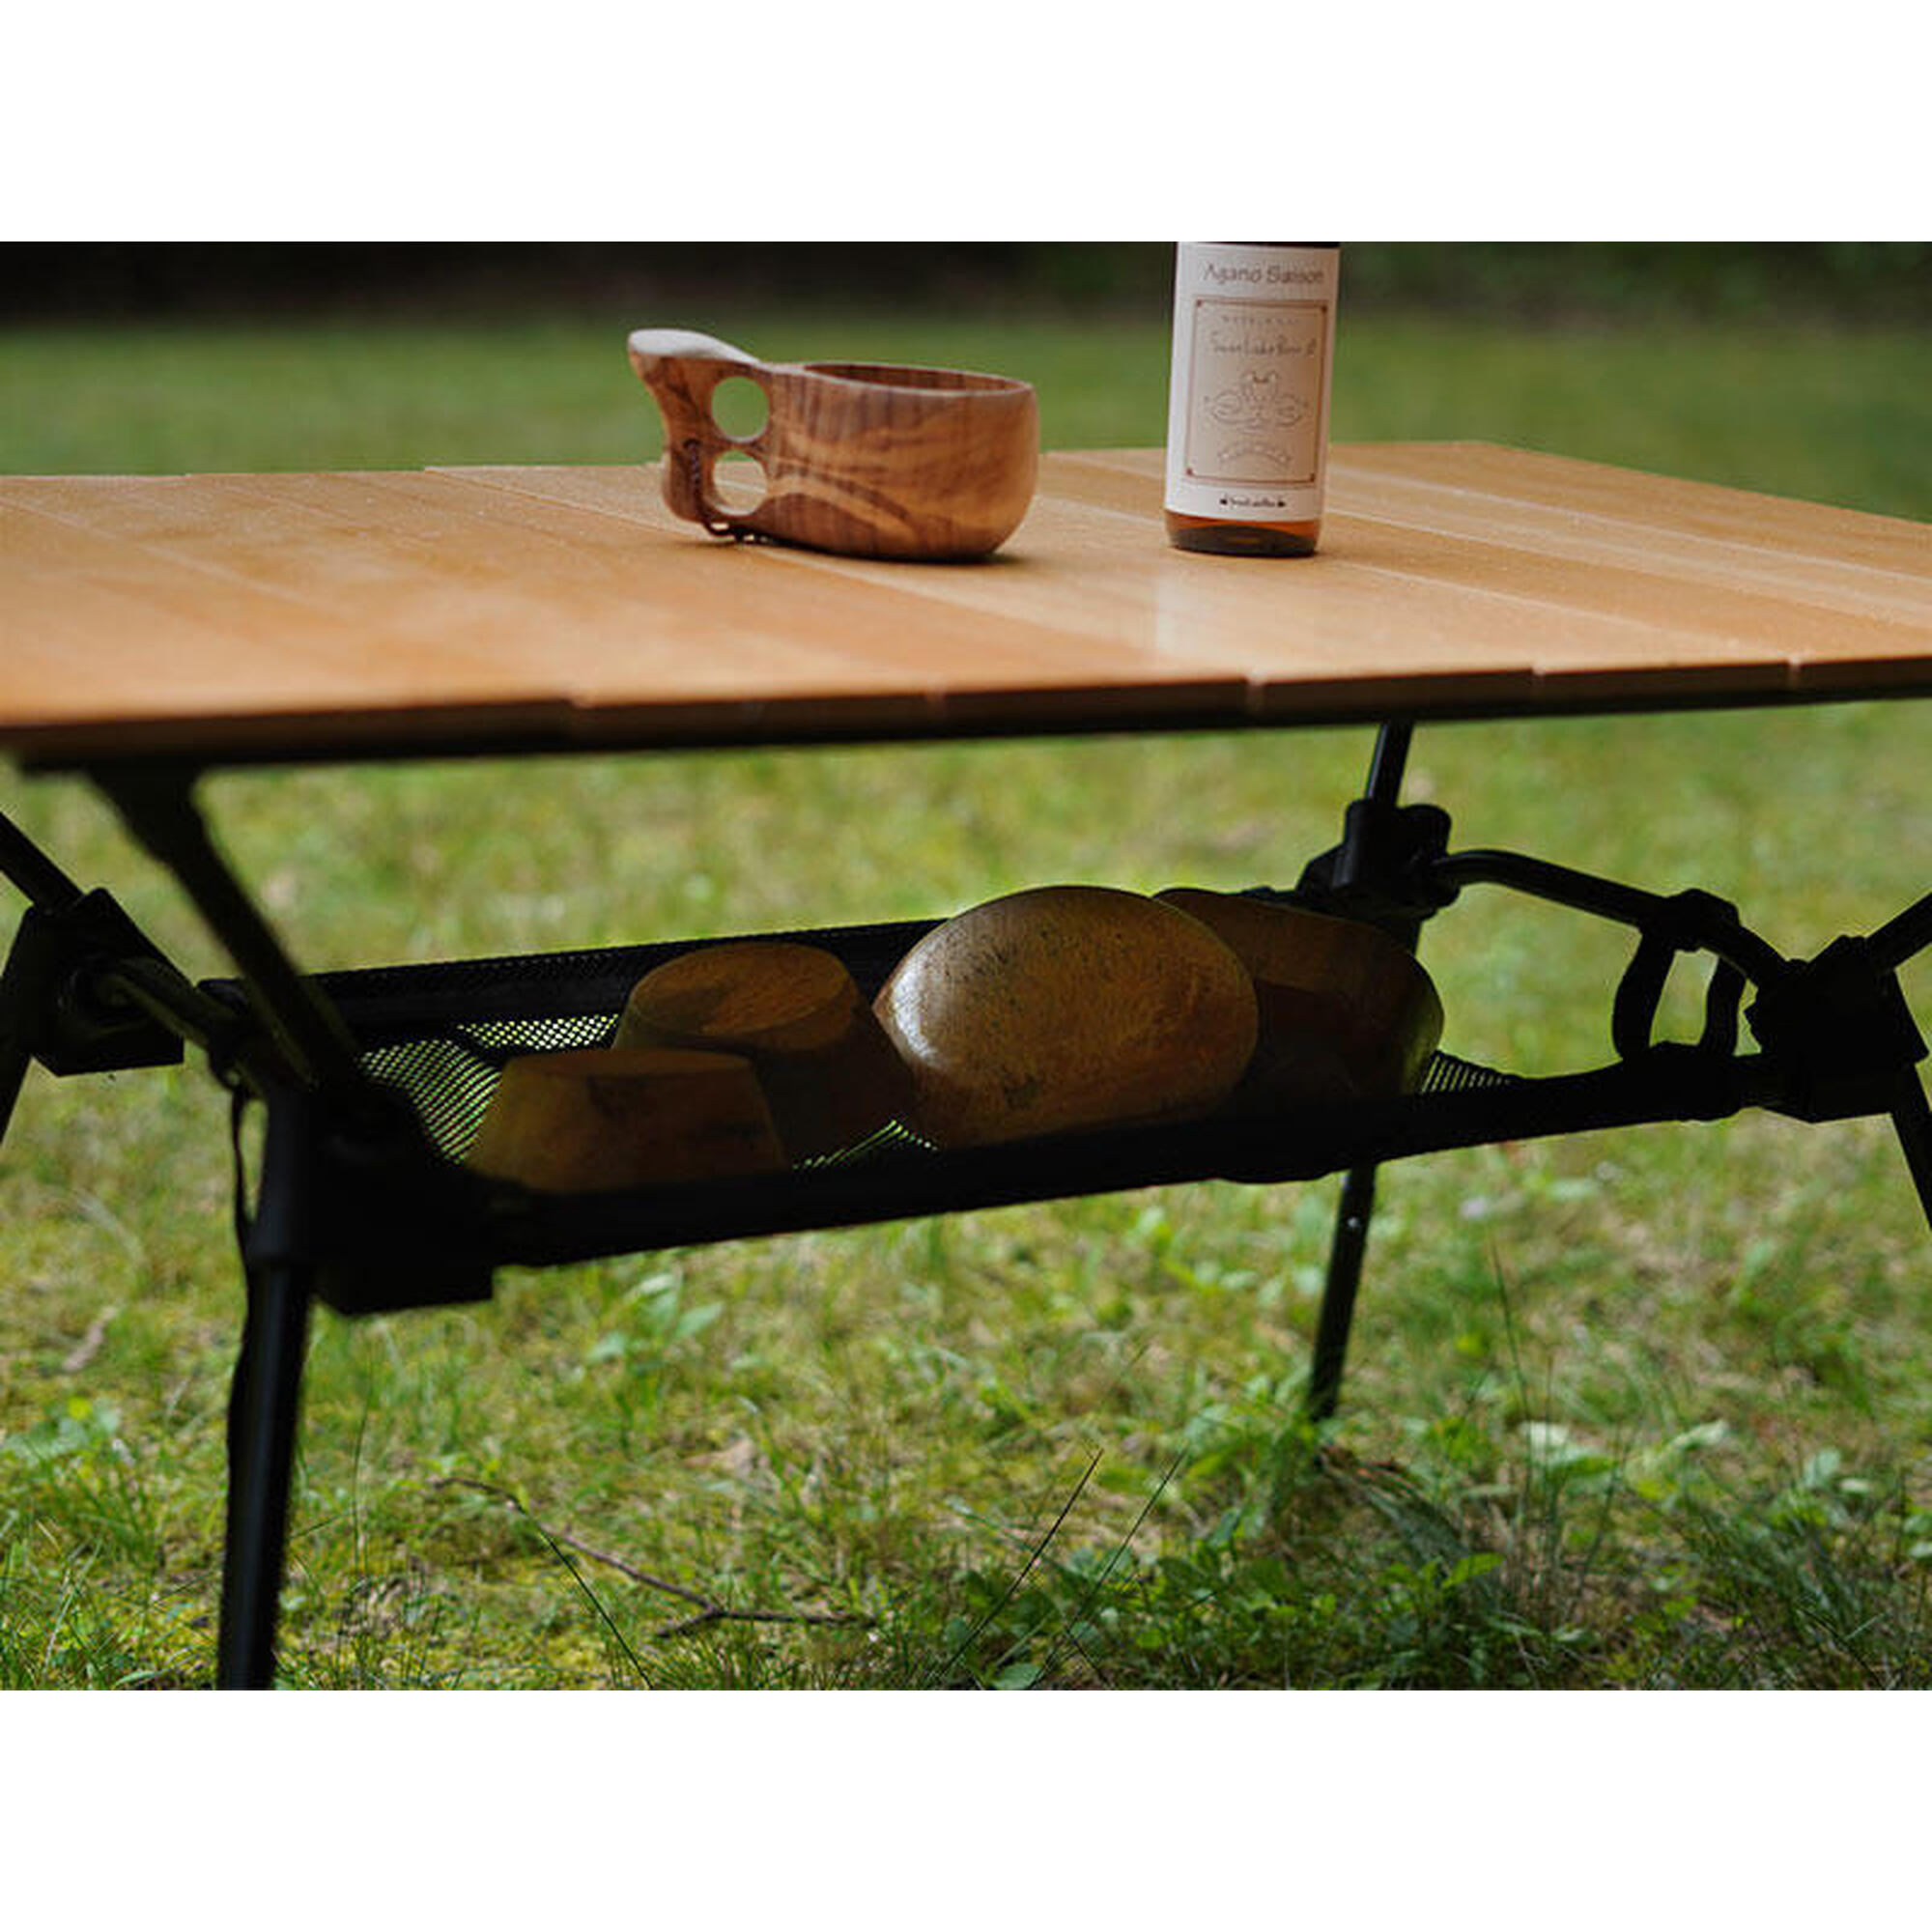 KYANARY Camping Table - M